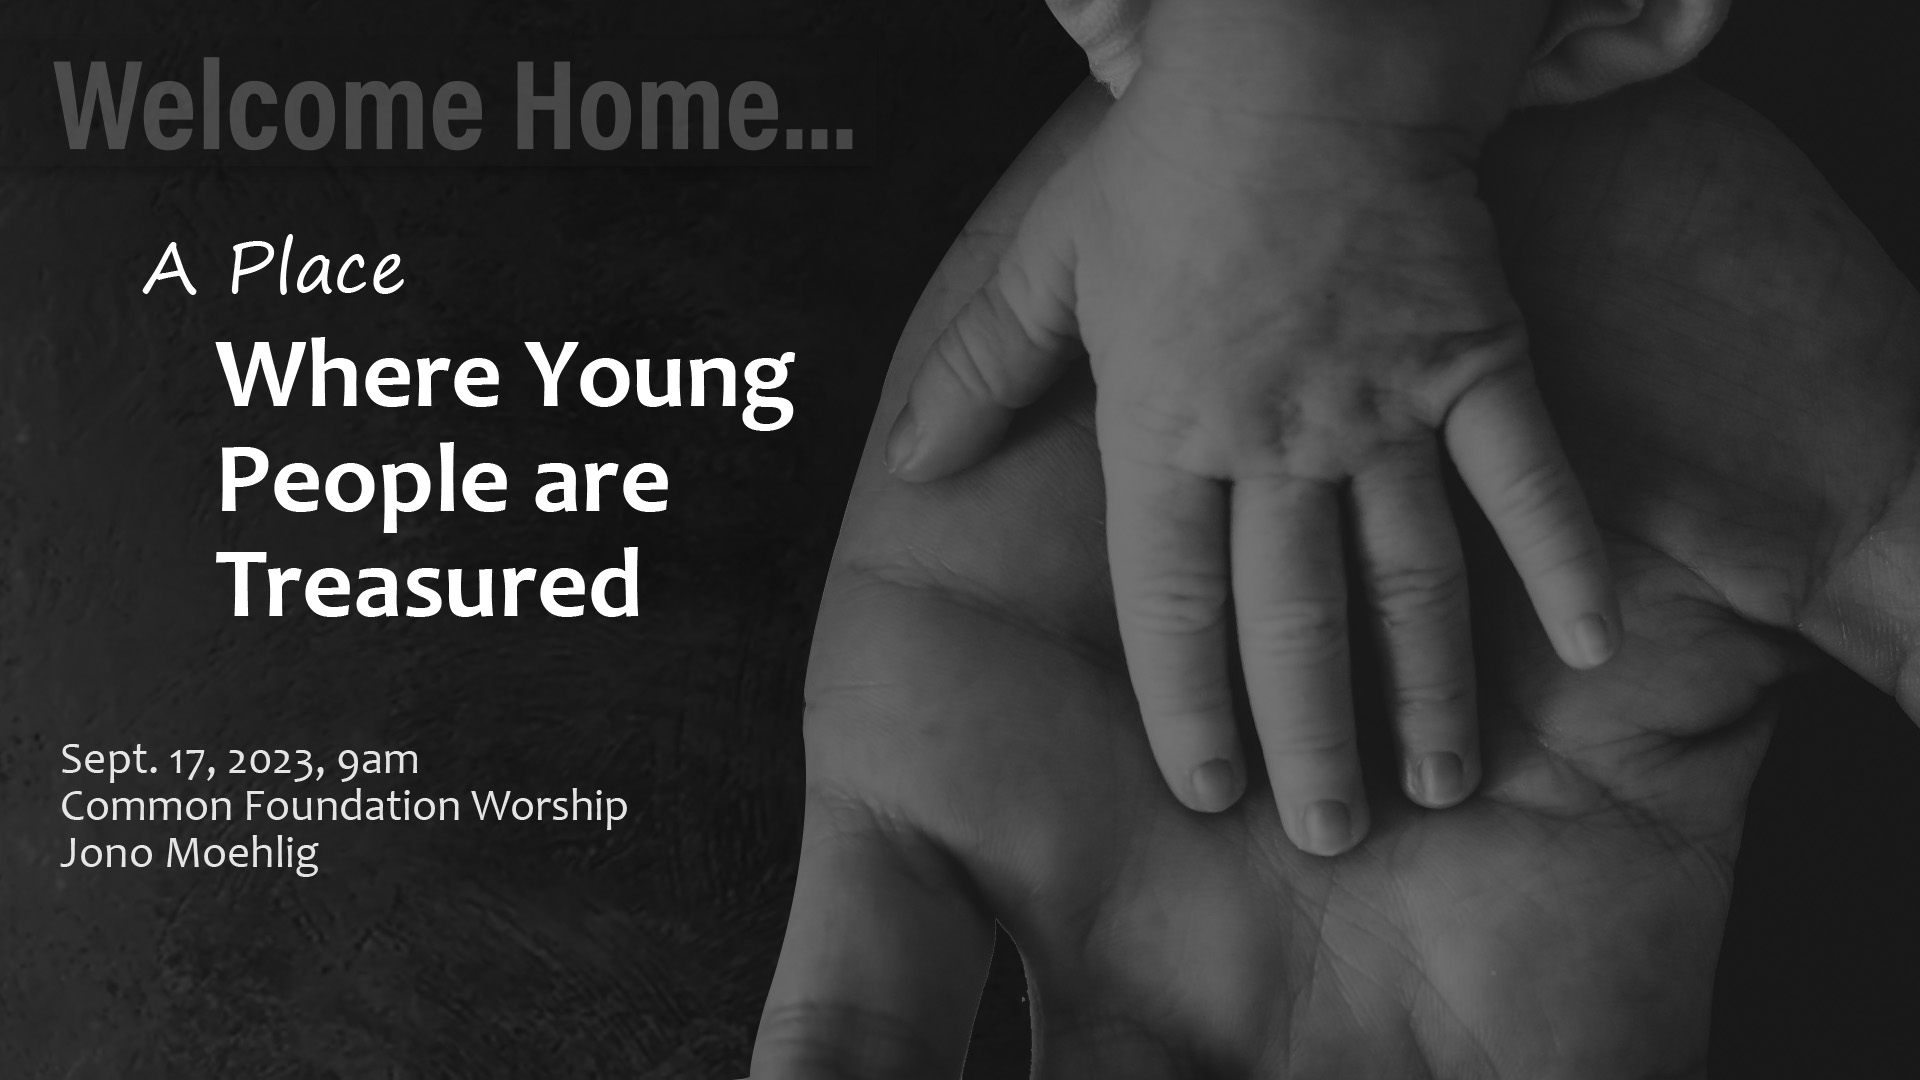 Welcome Home: A Place Where Young People are Treasured